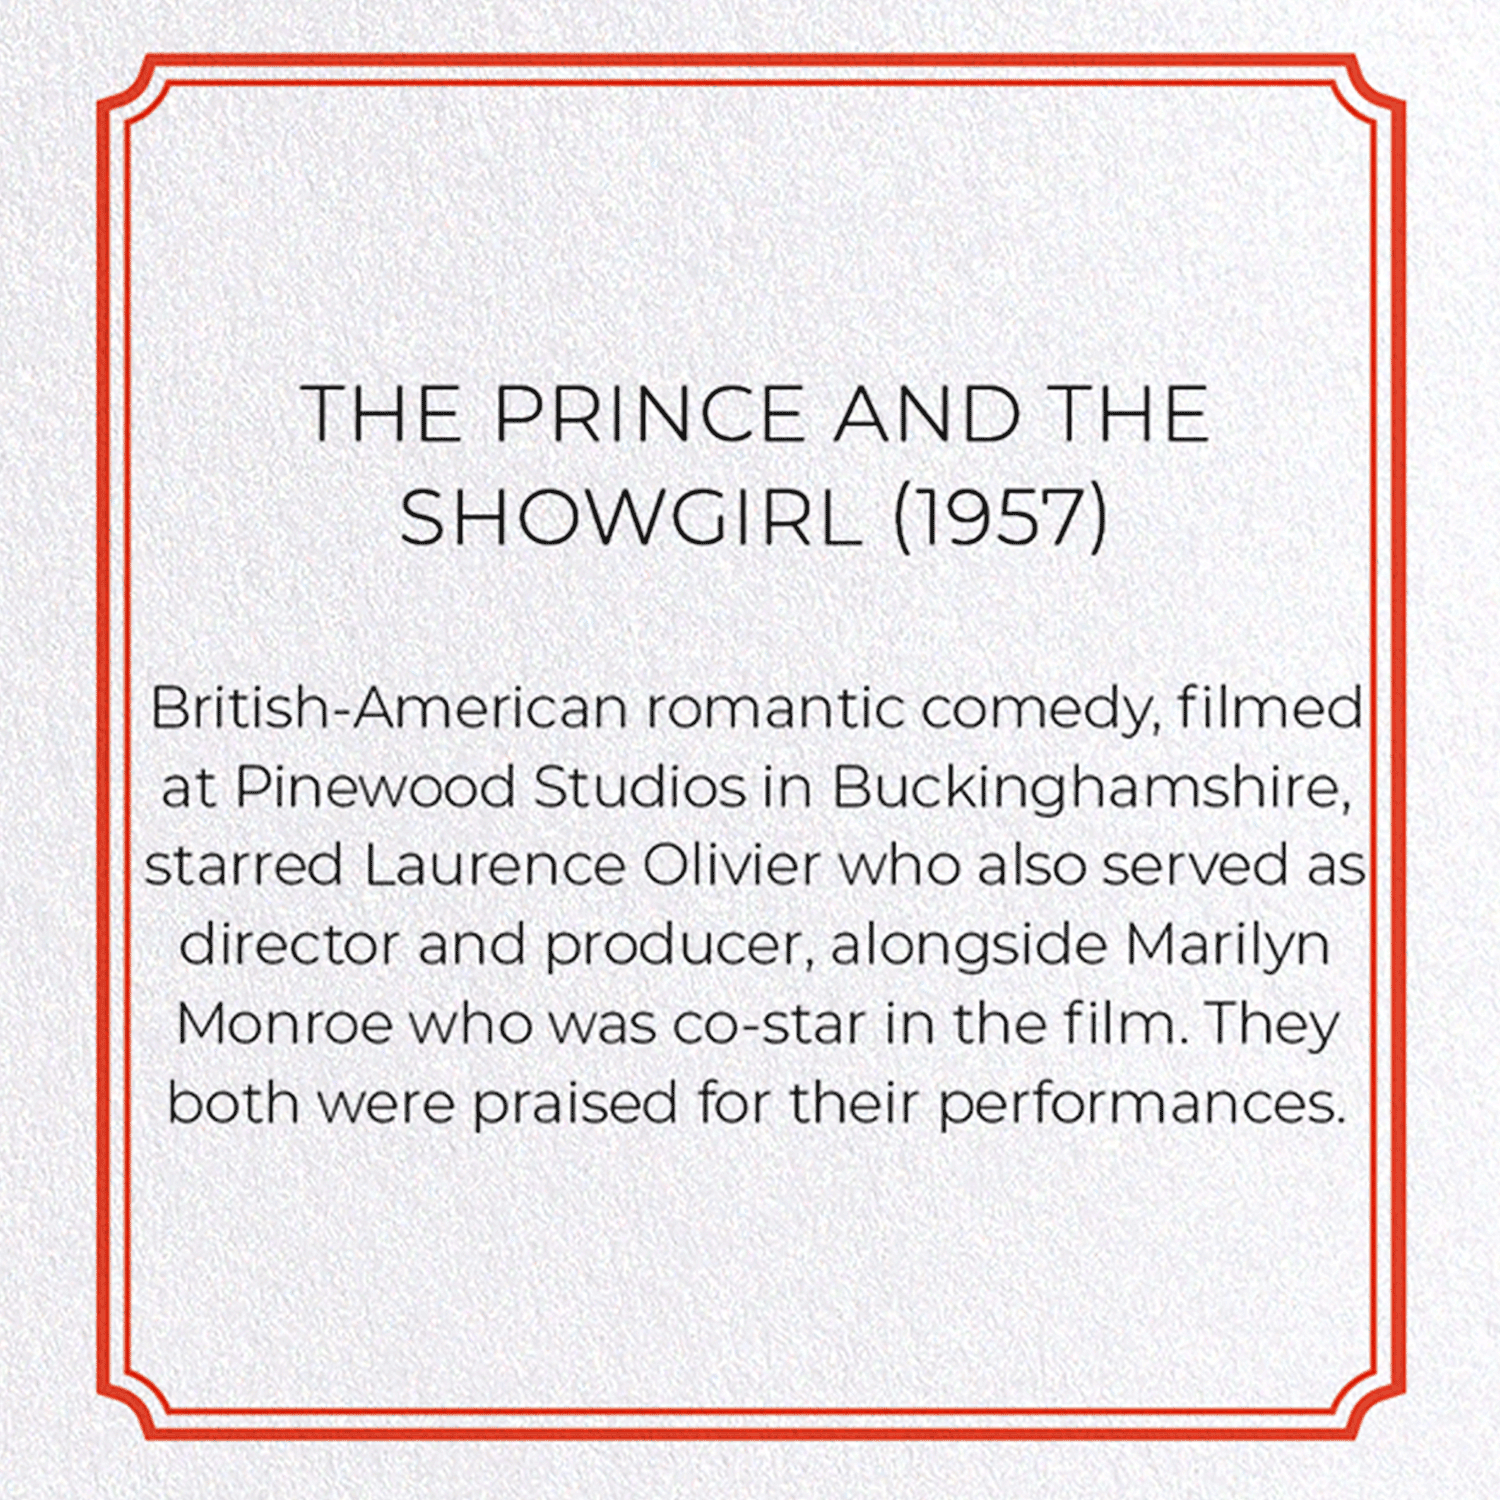 THE PRINCE AND THE SHOWGIRL (1957): Poster Greeting Card